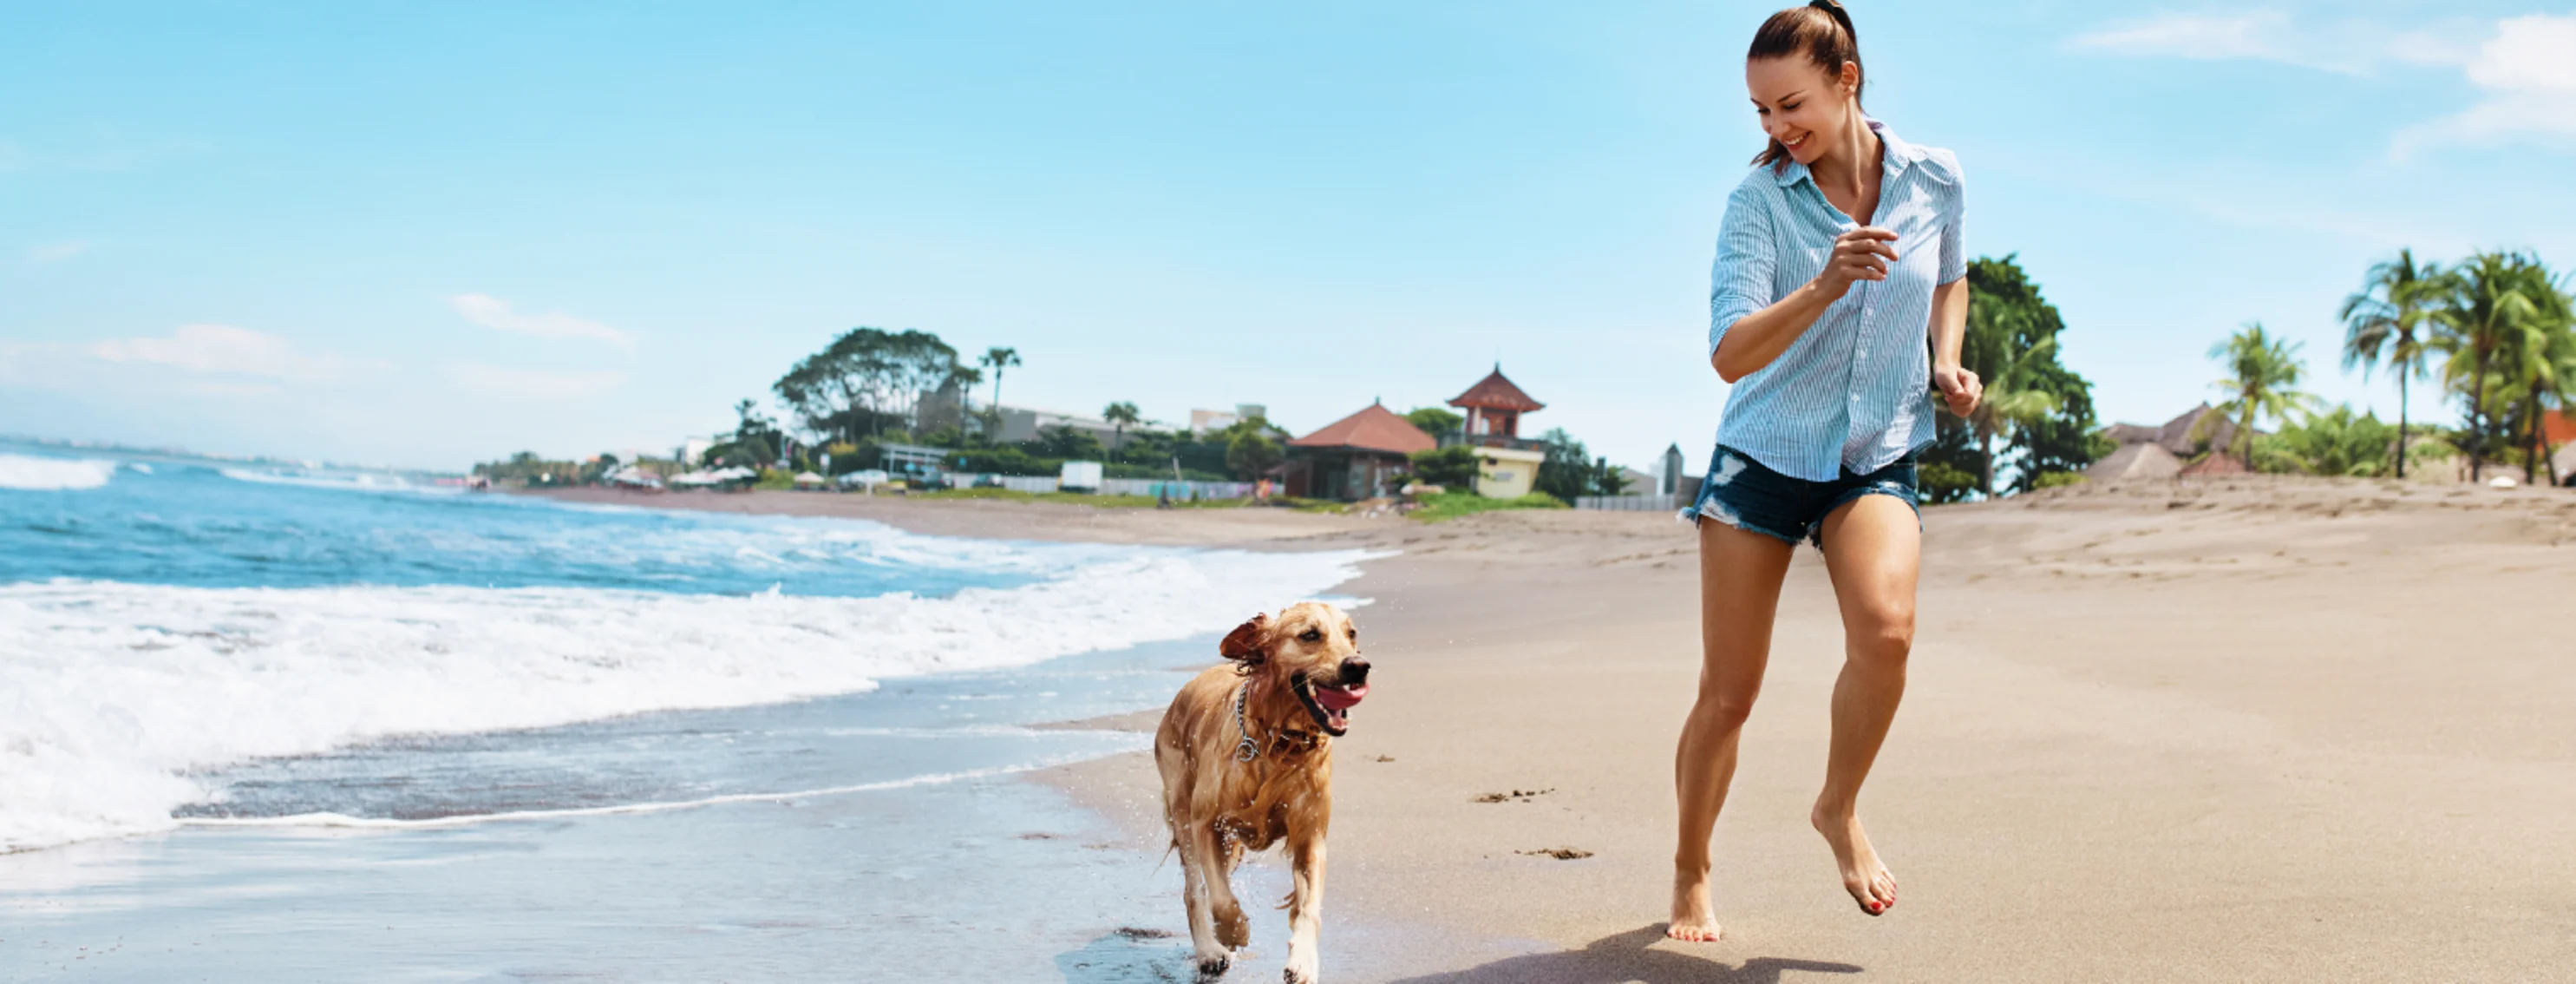 Women and dog running on the beach with waves